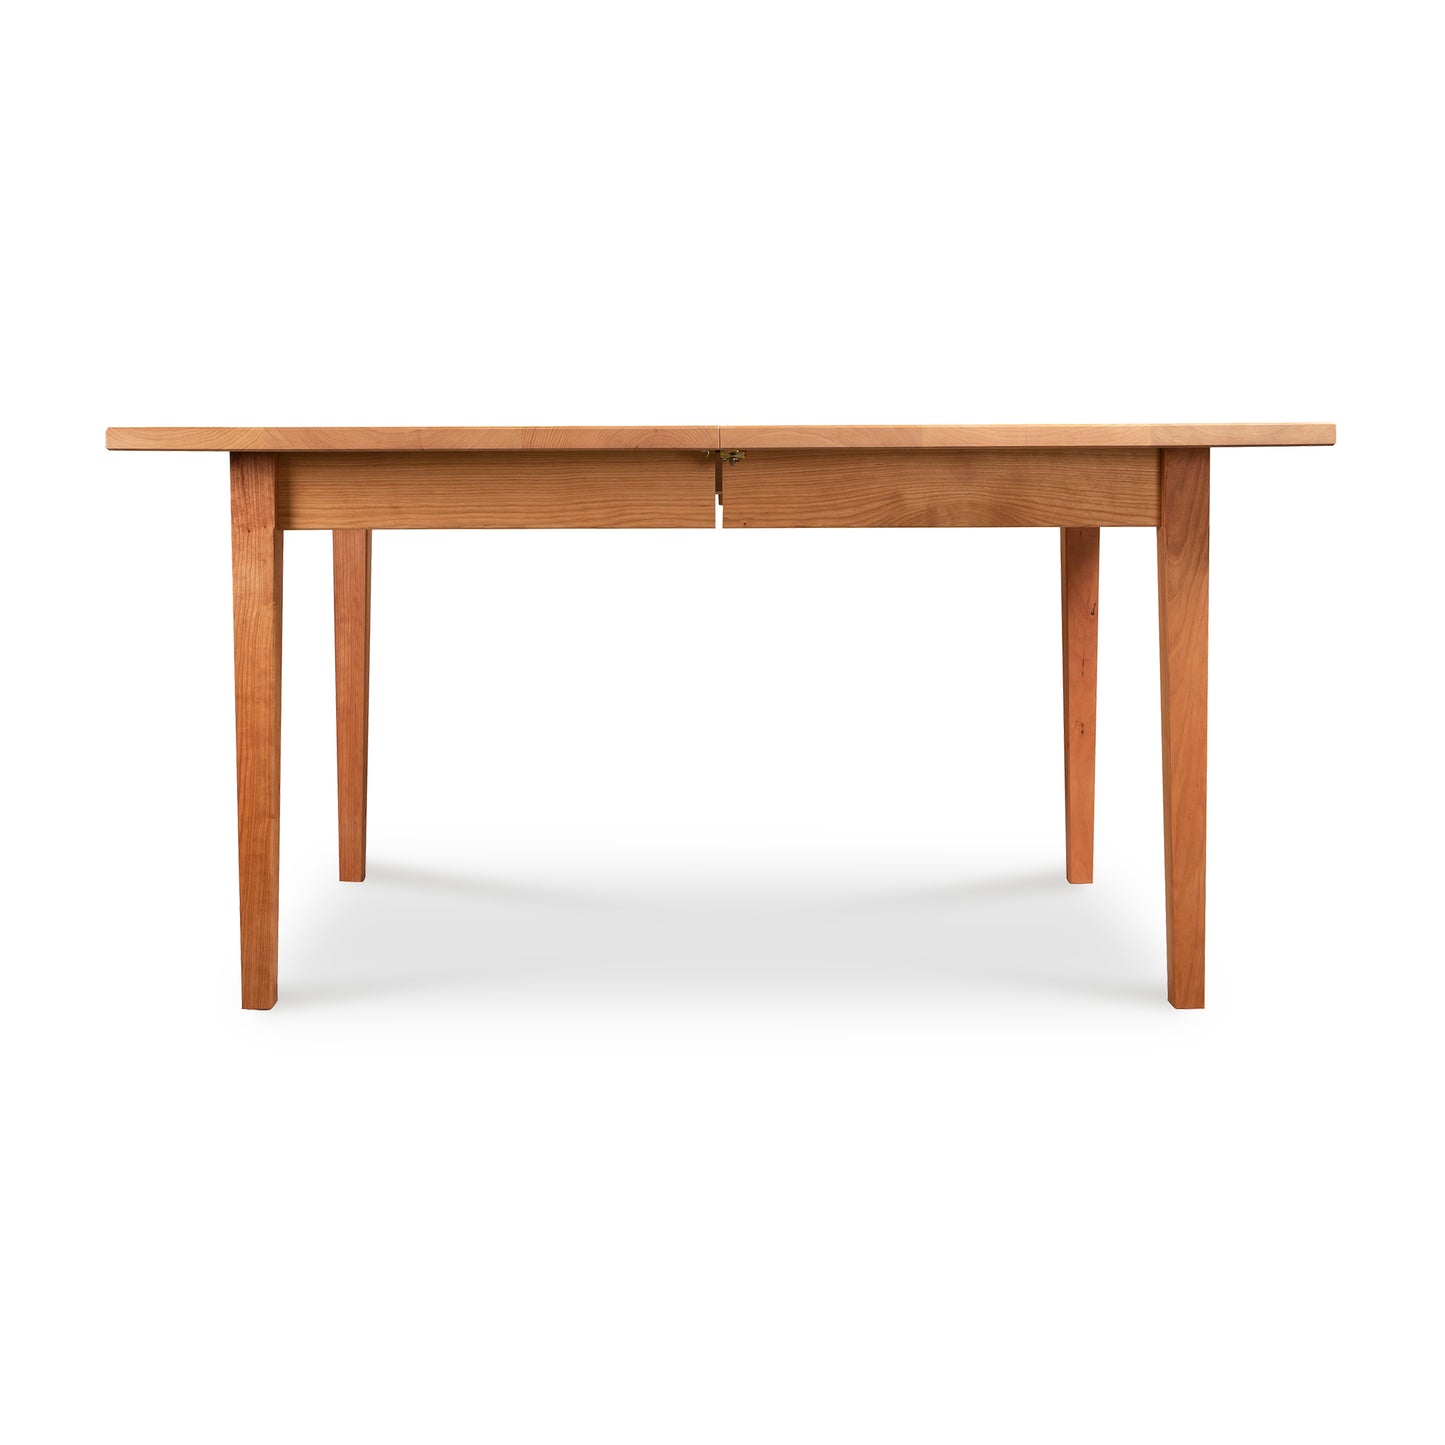 A Vermont Shaker Rectangular Extension Dining Table made from sustainably harvested wood, with four legs, isolated on a white background. Brand: Maple Corner Woodworks.